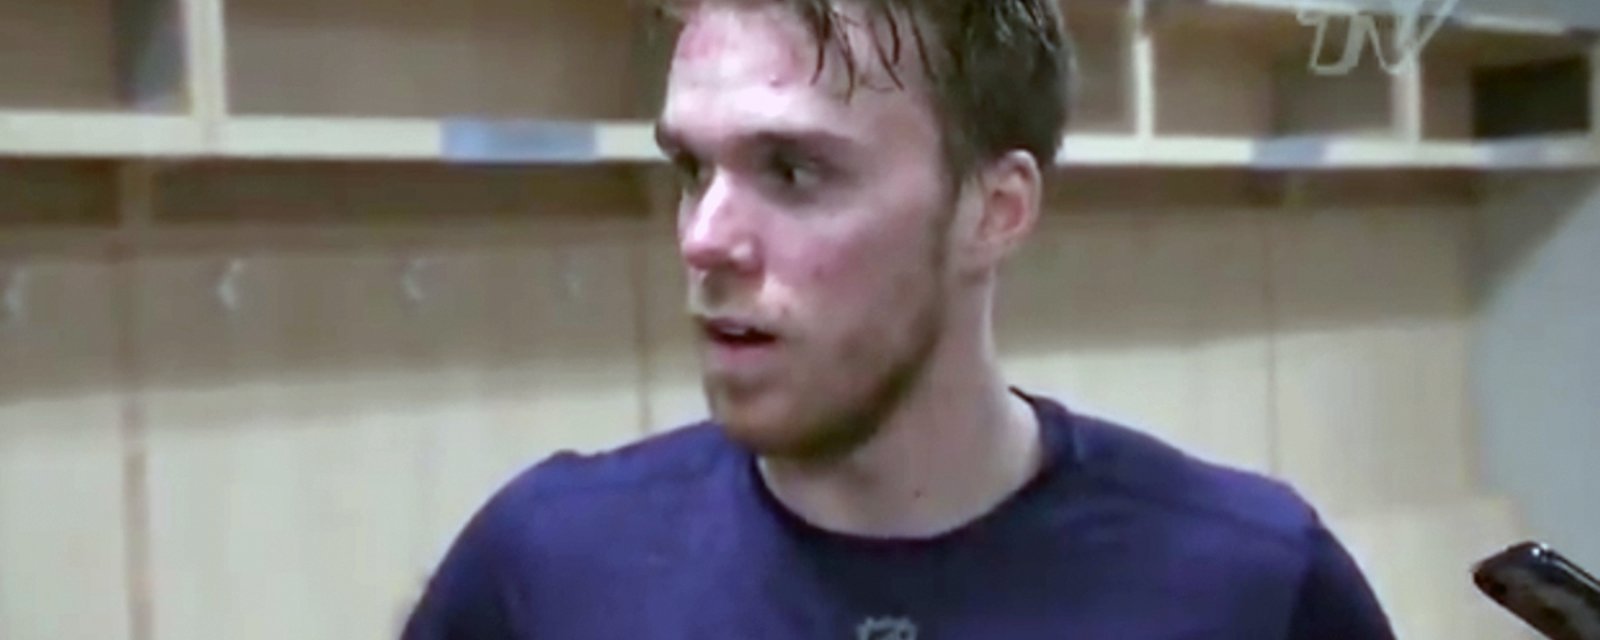 A visibly frustrated and angry McDavid reacts live to the news that the Oilers have been eliminated from playoff contention